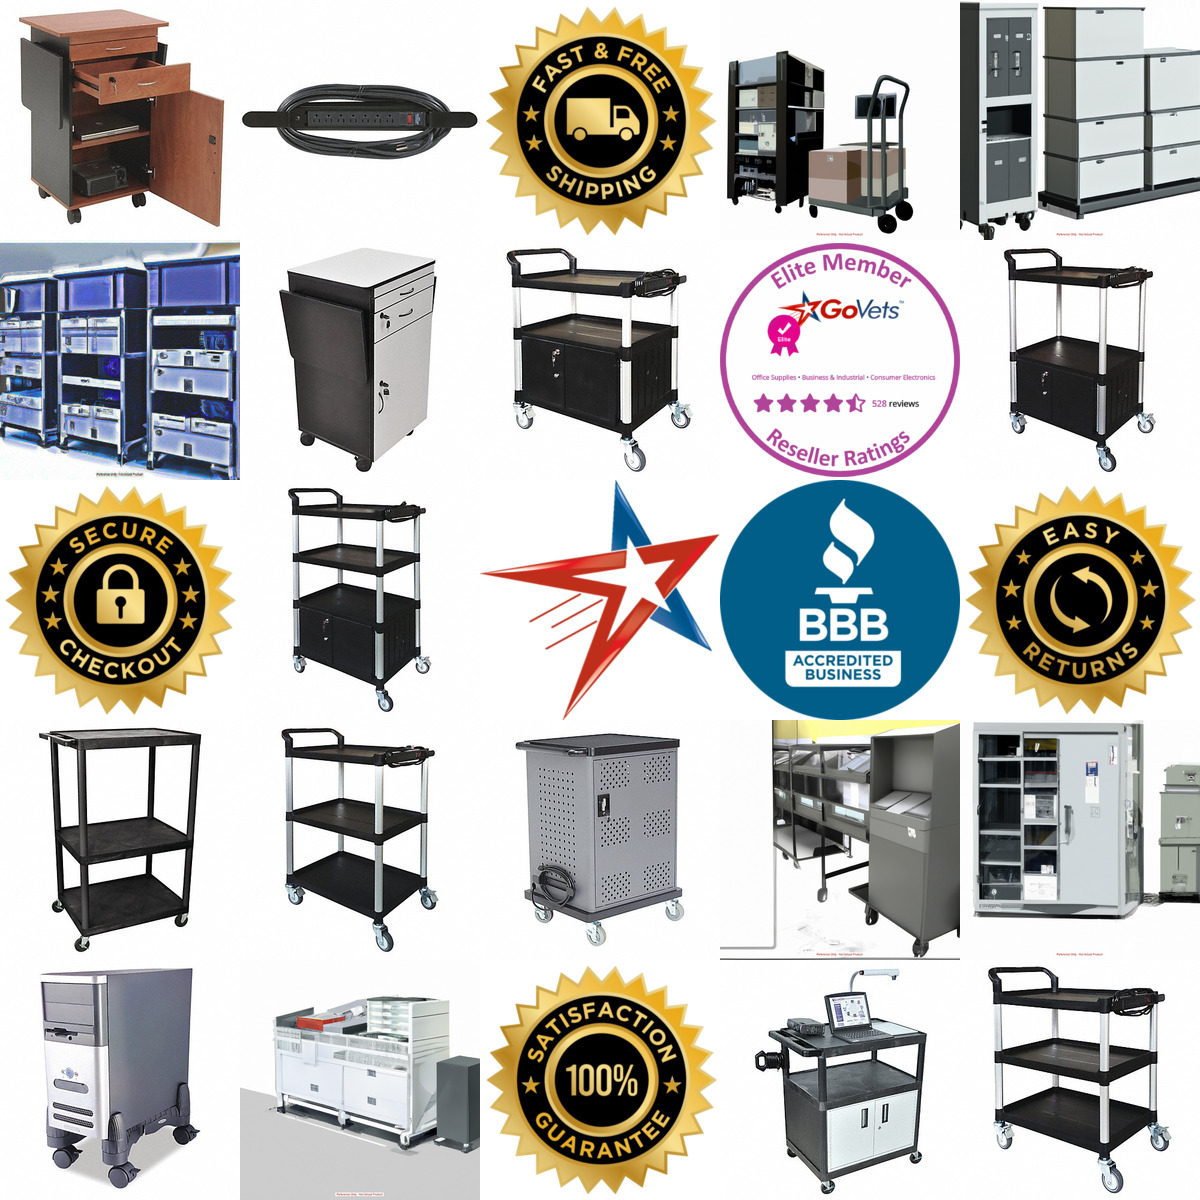 A selection of Media Carts and Cabinets products on GoVets